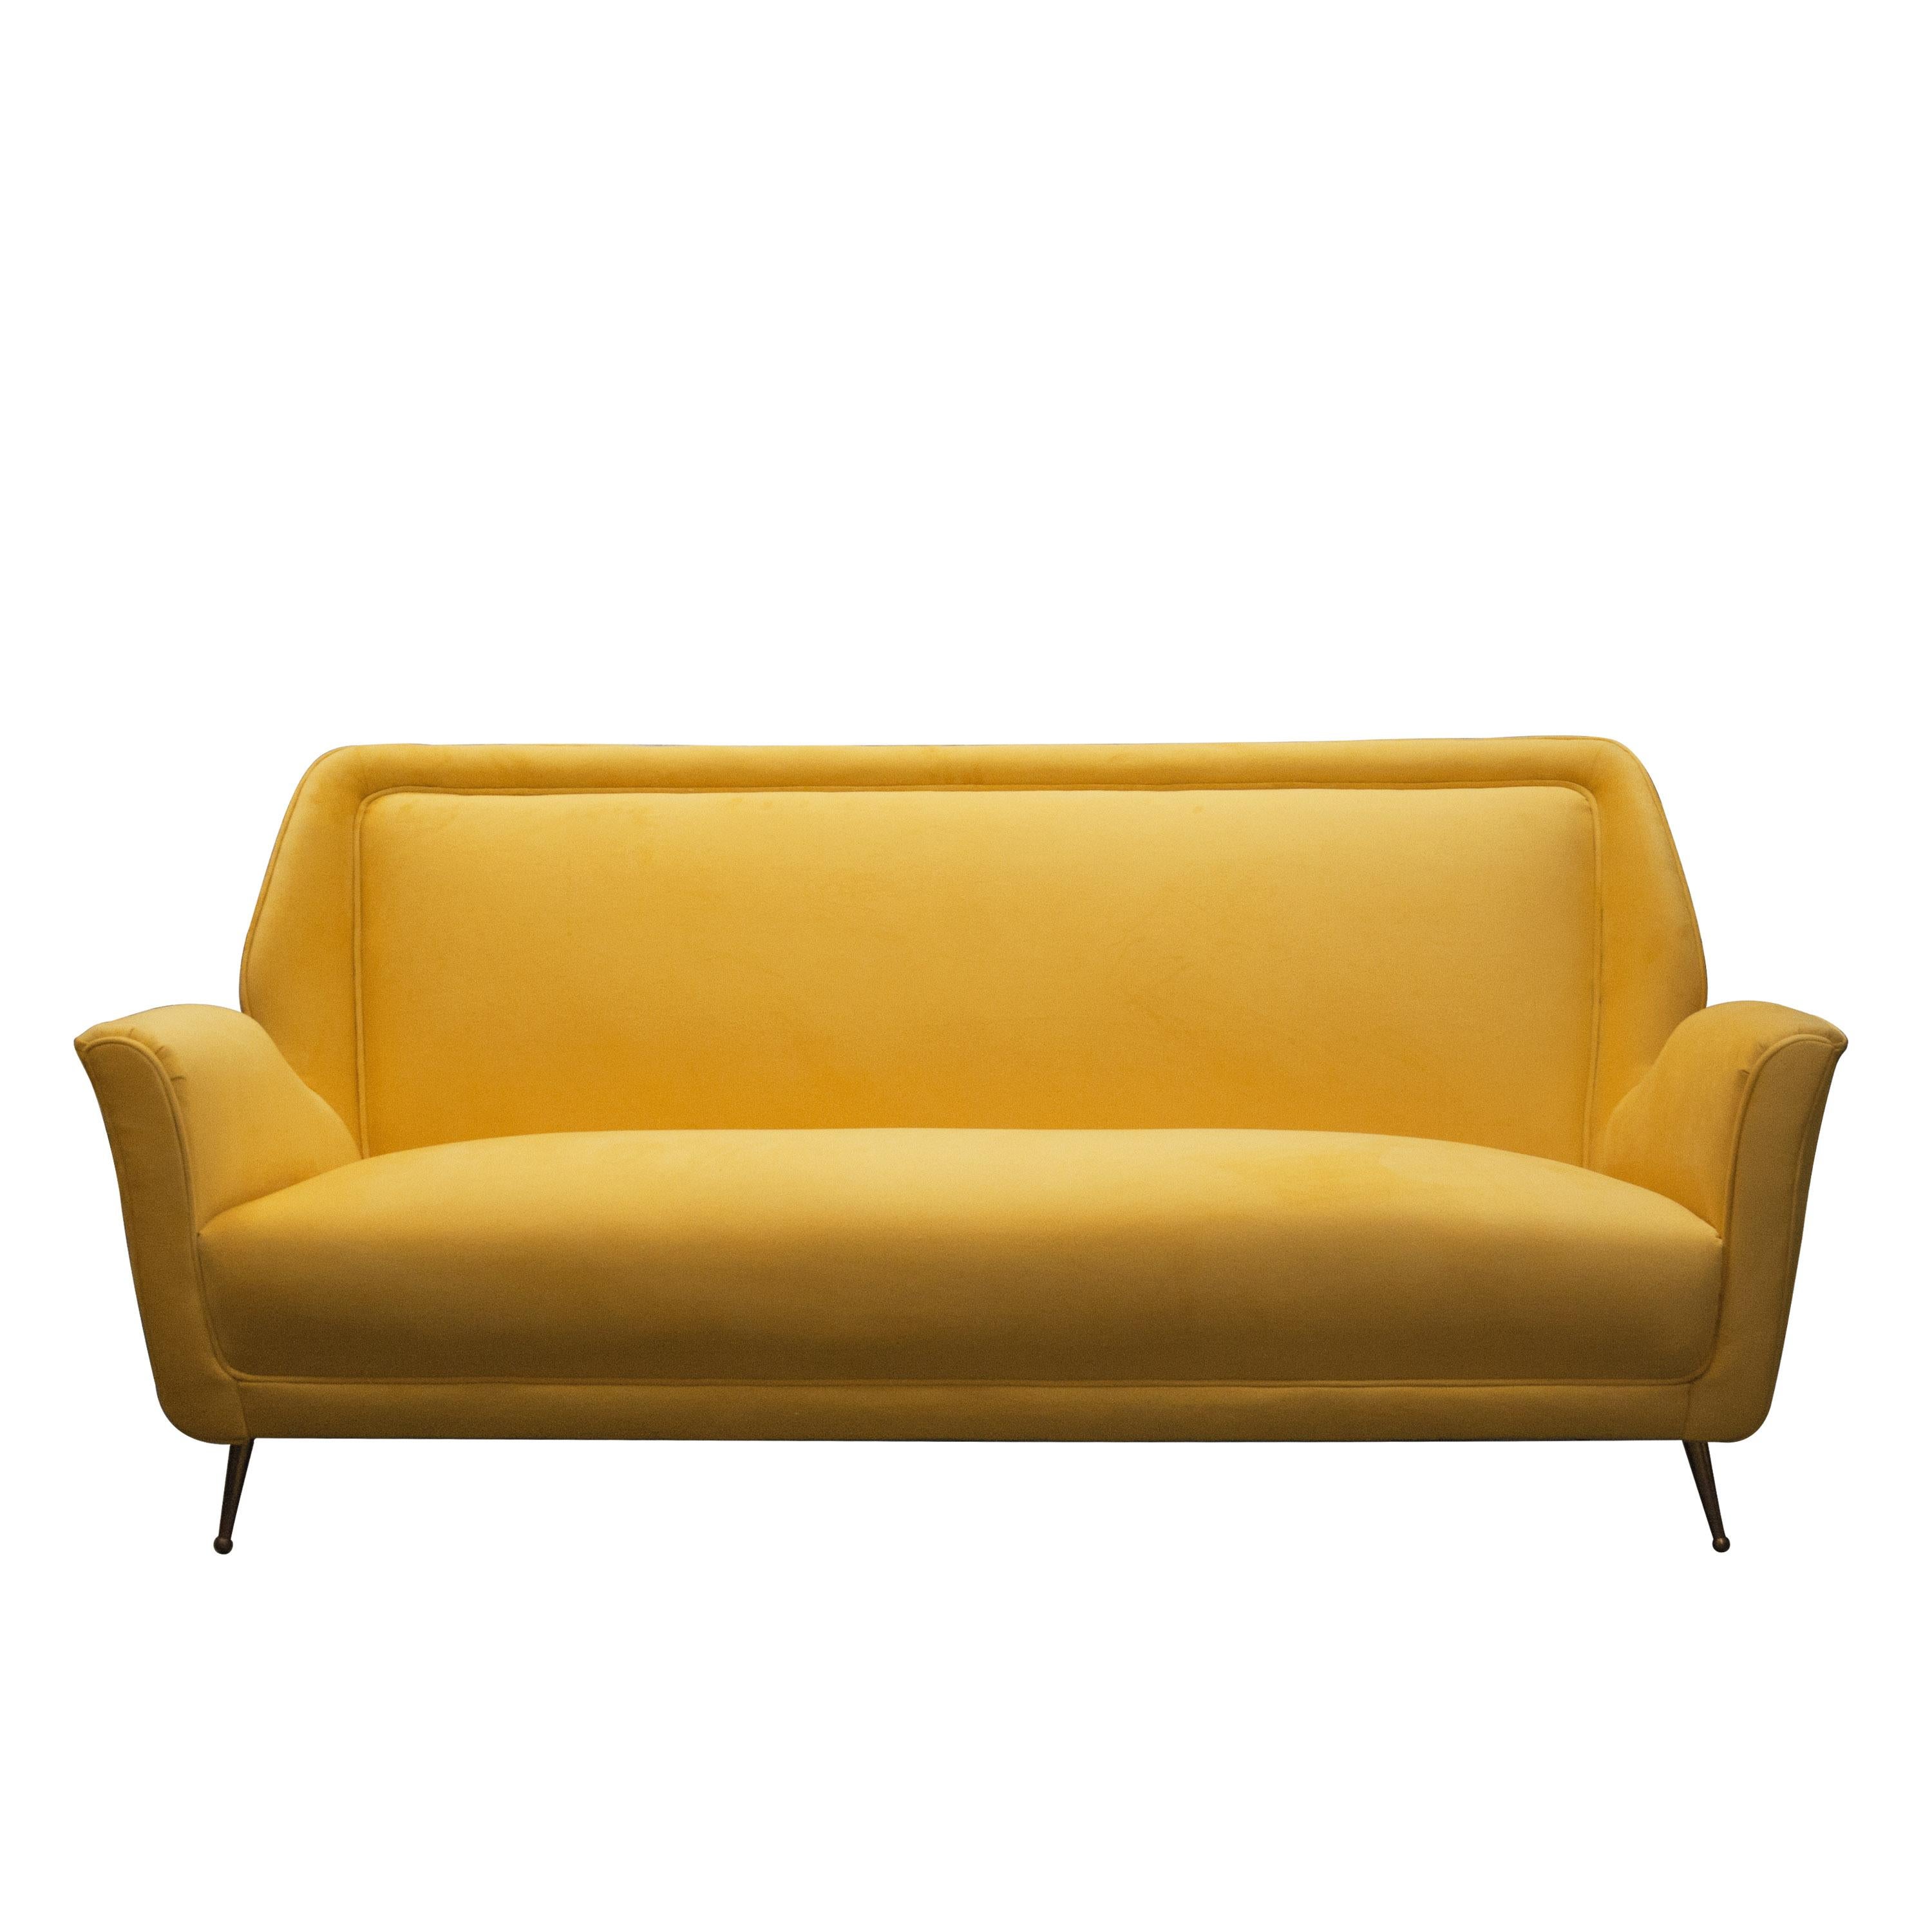 Mid-Century Modern three-seating sofa. Made of solid wood structure and polished brass legs. Upholstered in light yellow cotton velvet.